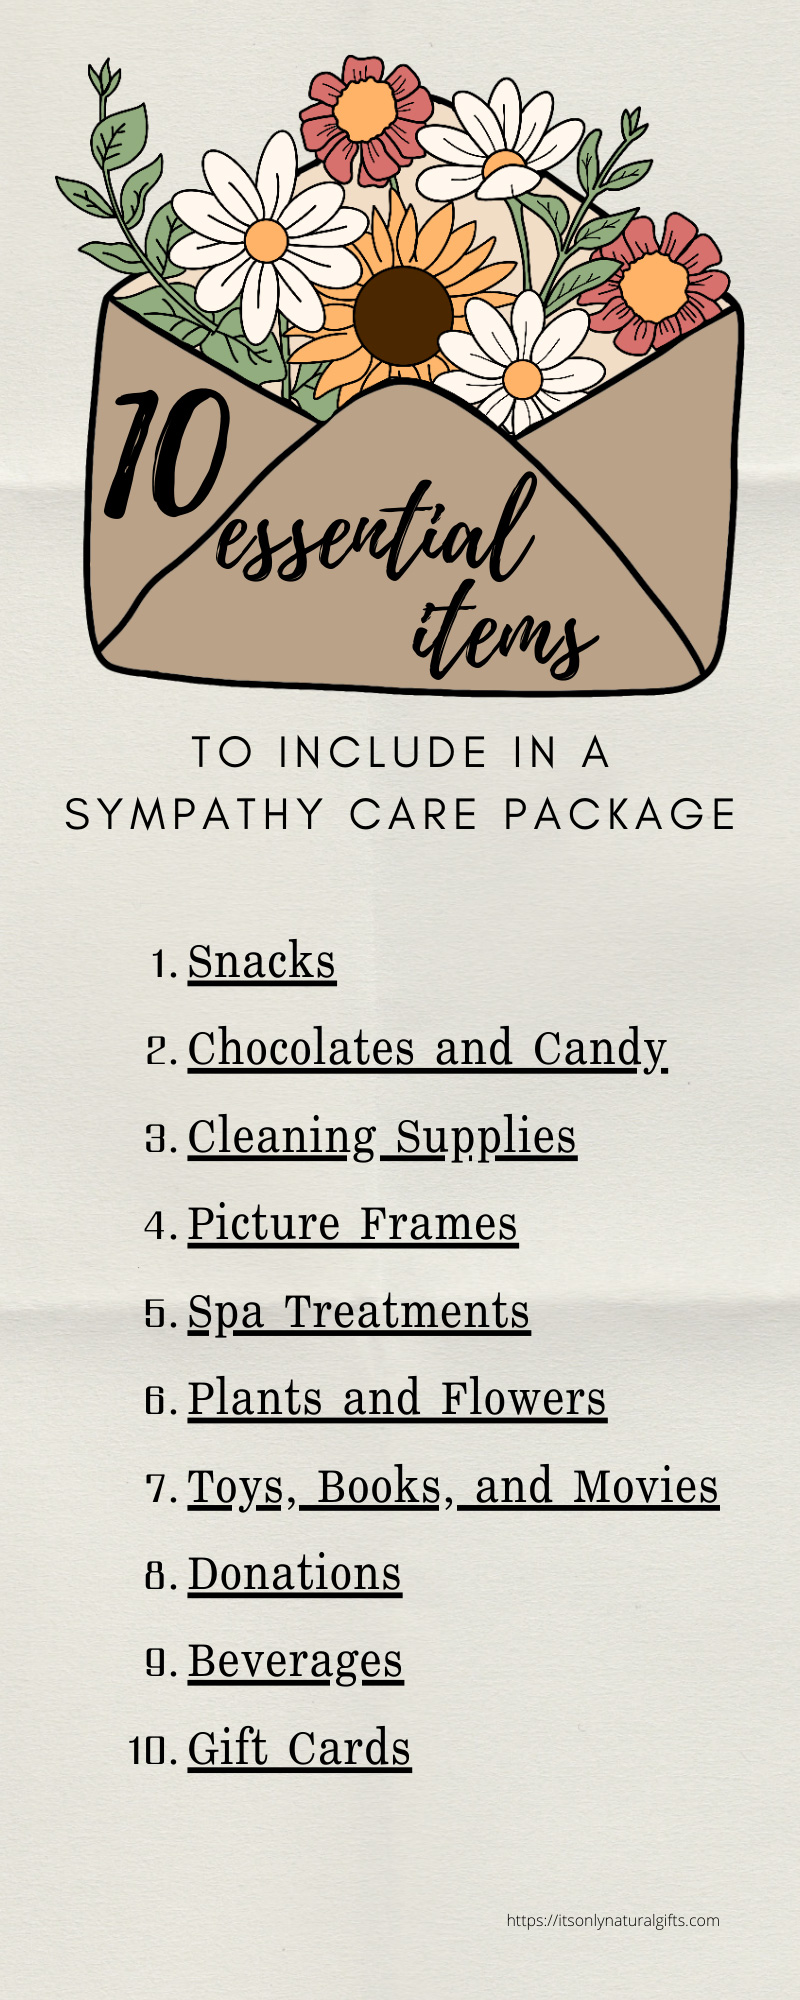 10 Essential Items To Include in a Sympathy Care Package